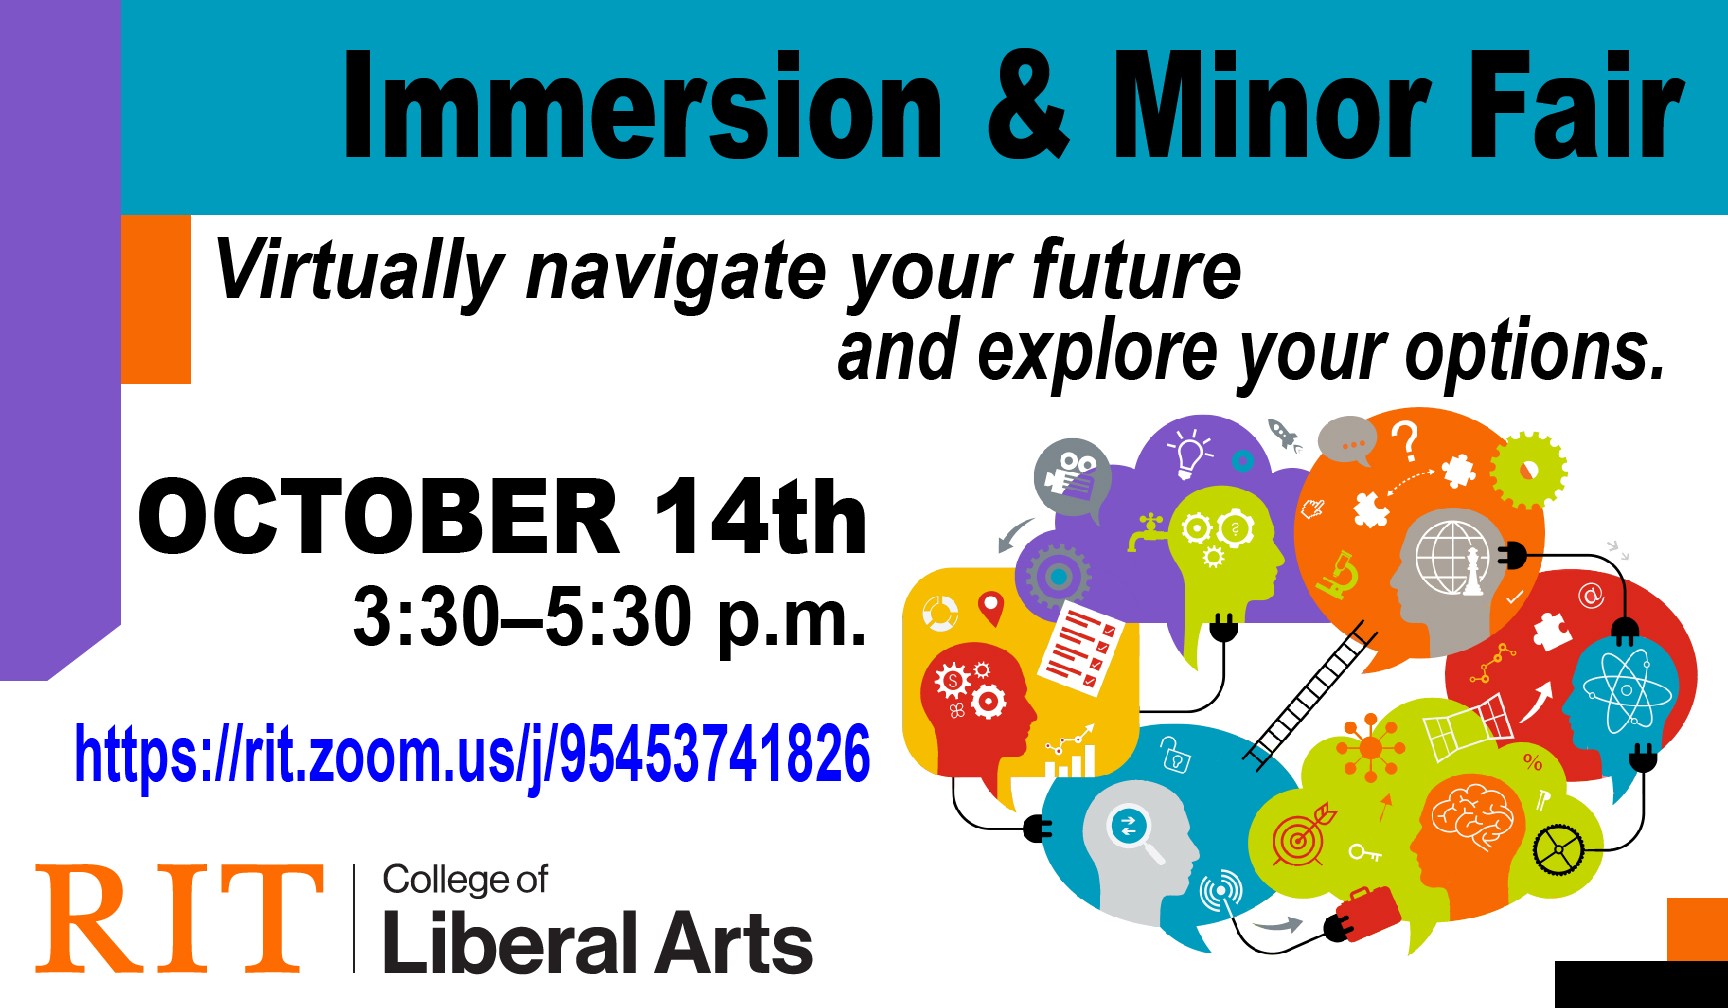 Immersion & Minor Fair, virtually navigate your future and explore your options. October 14, 2020 3:30-5:30 p.m.